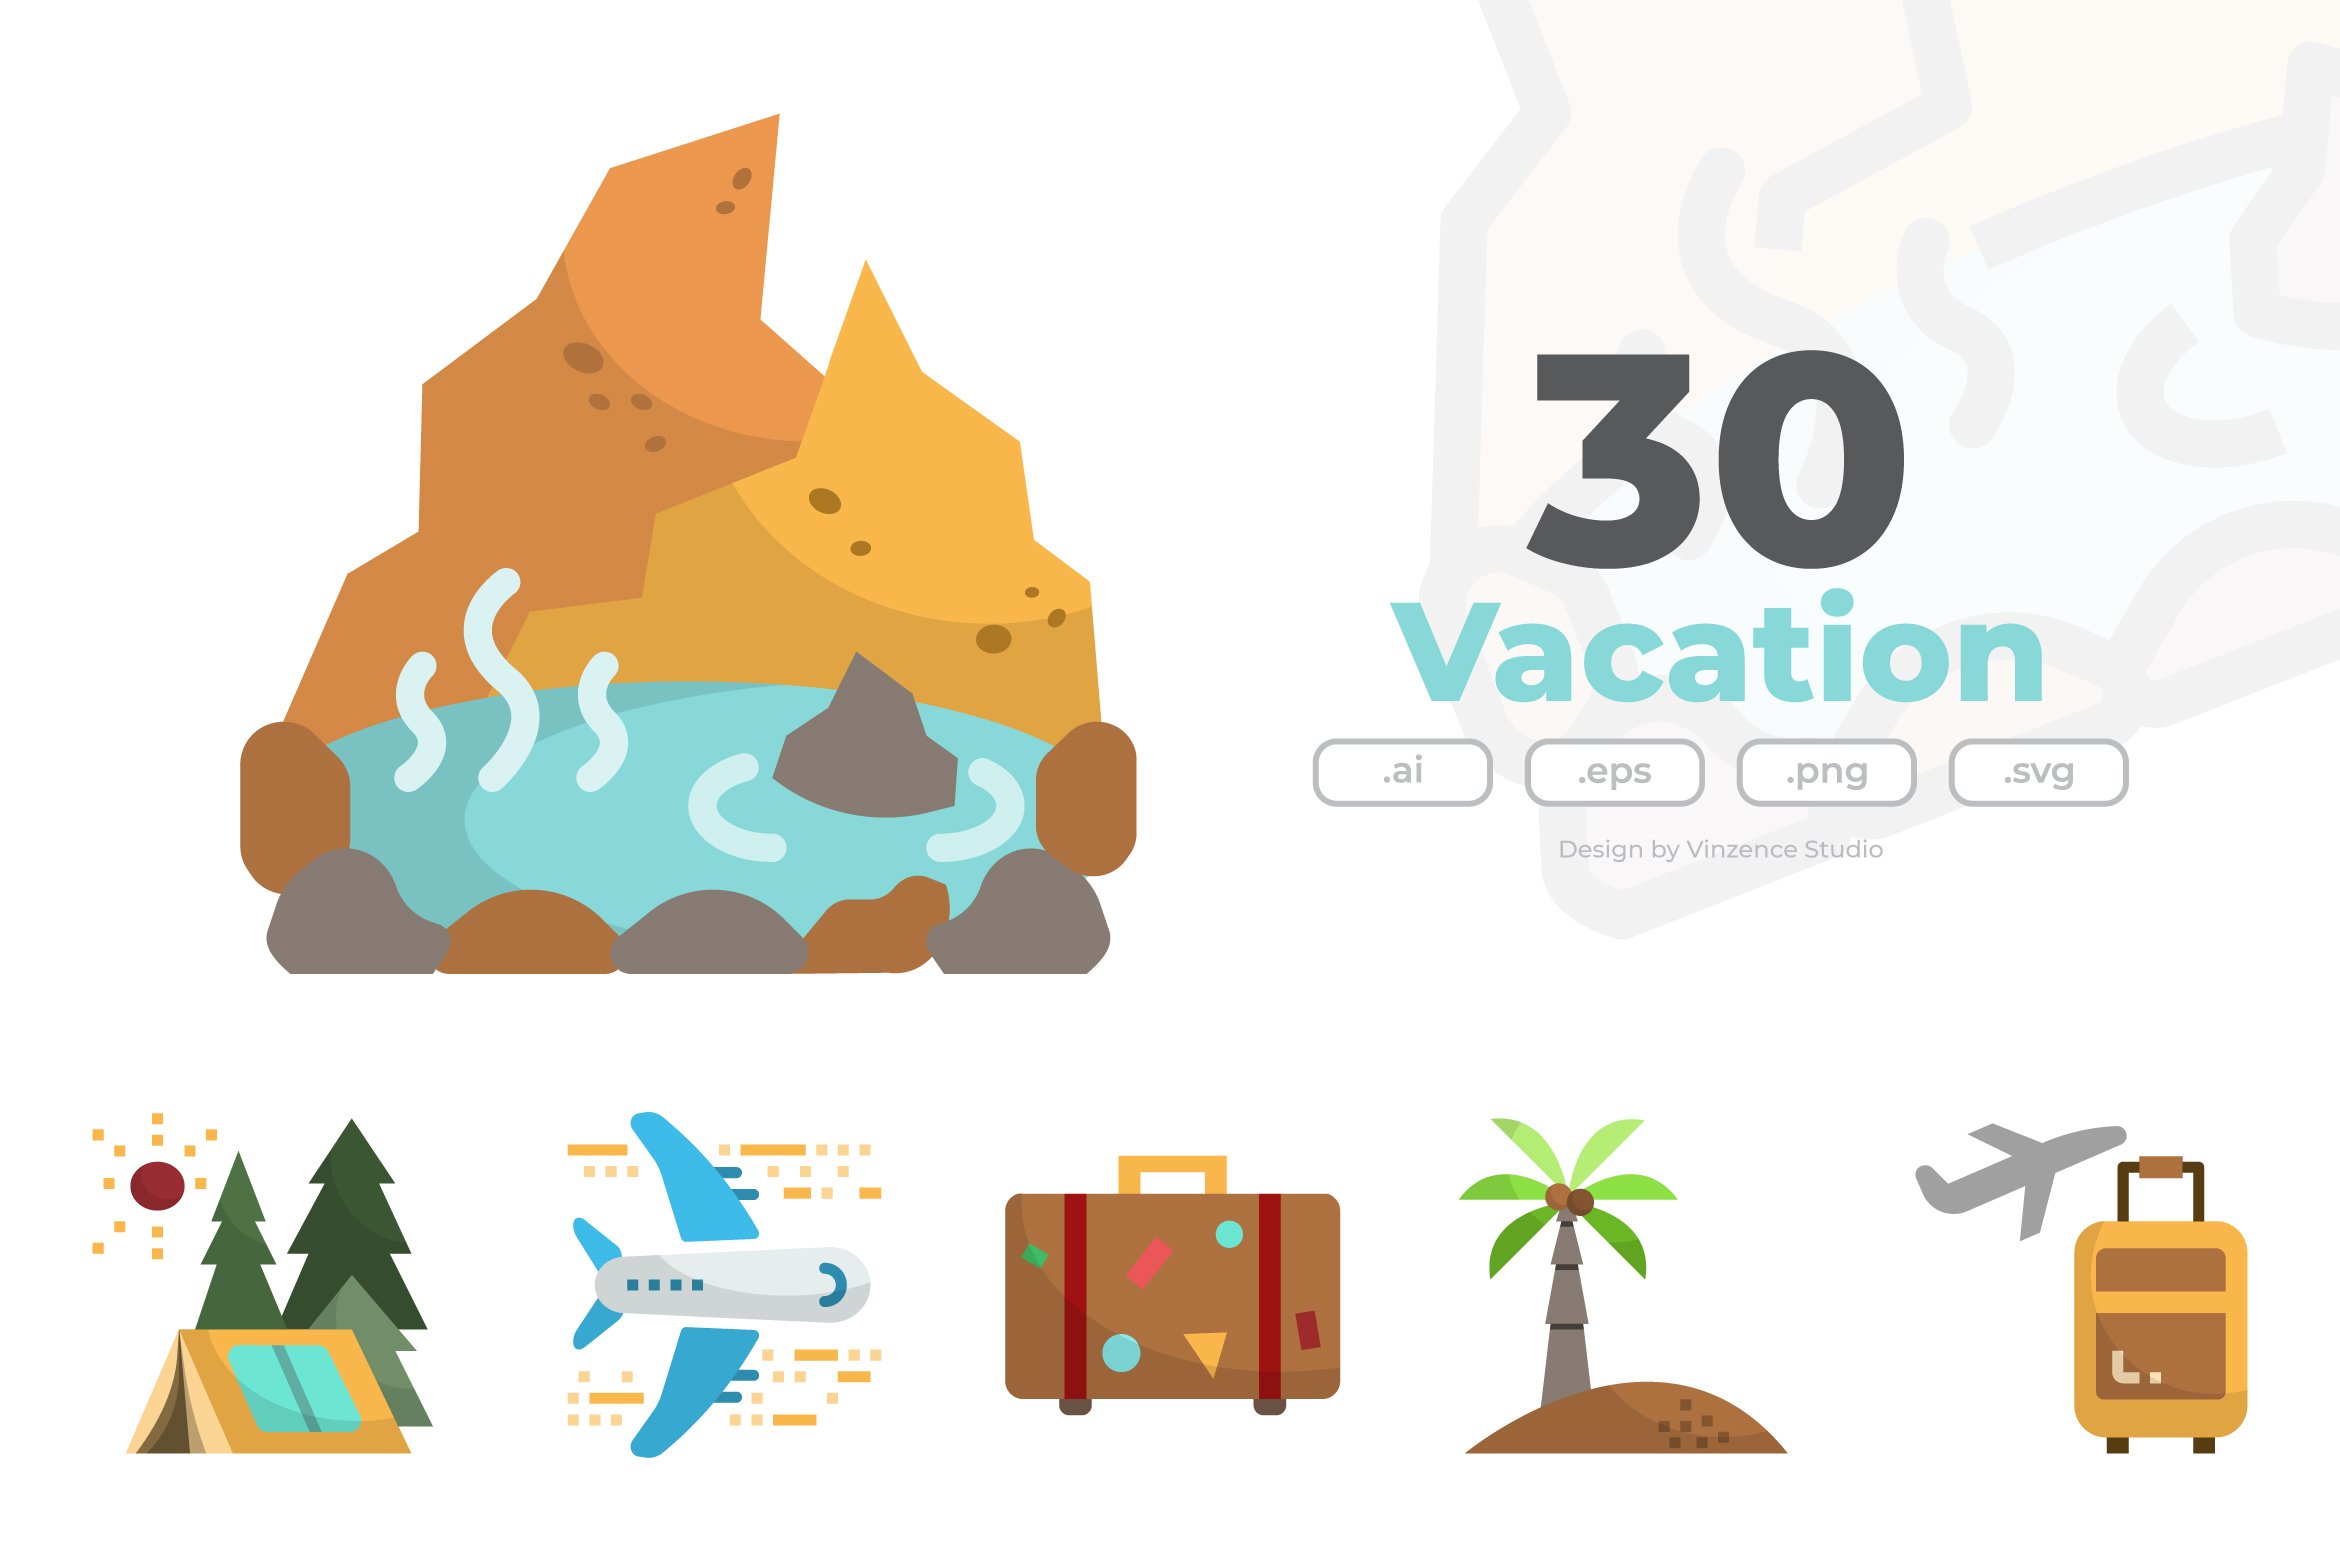 30 Vacation Icon Sets cover image.